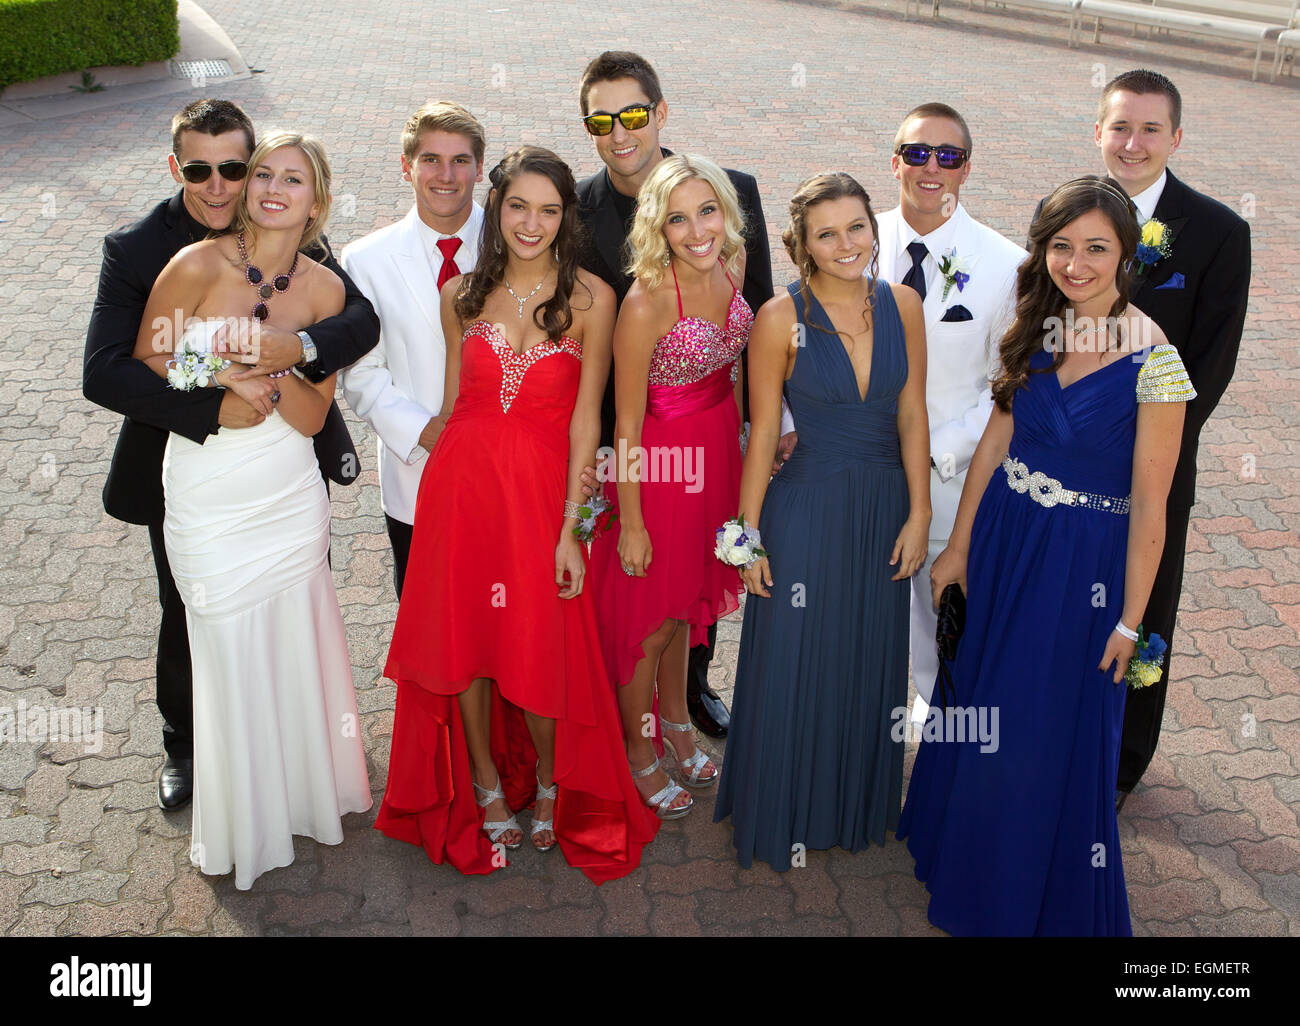 A happy group of high school students posing for a prom photo in their prom dresses and tuxedos Stock Photo